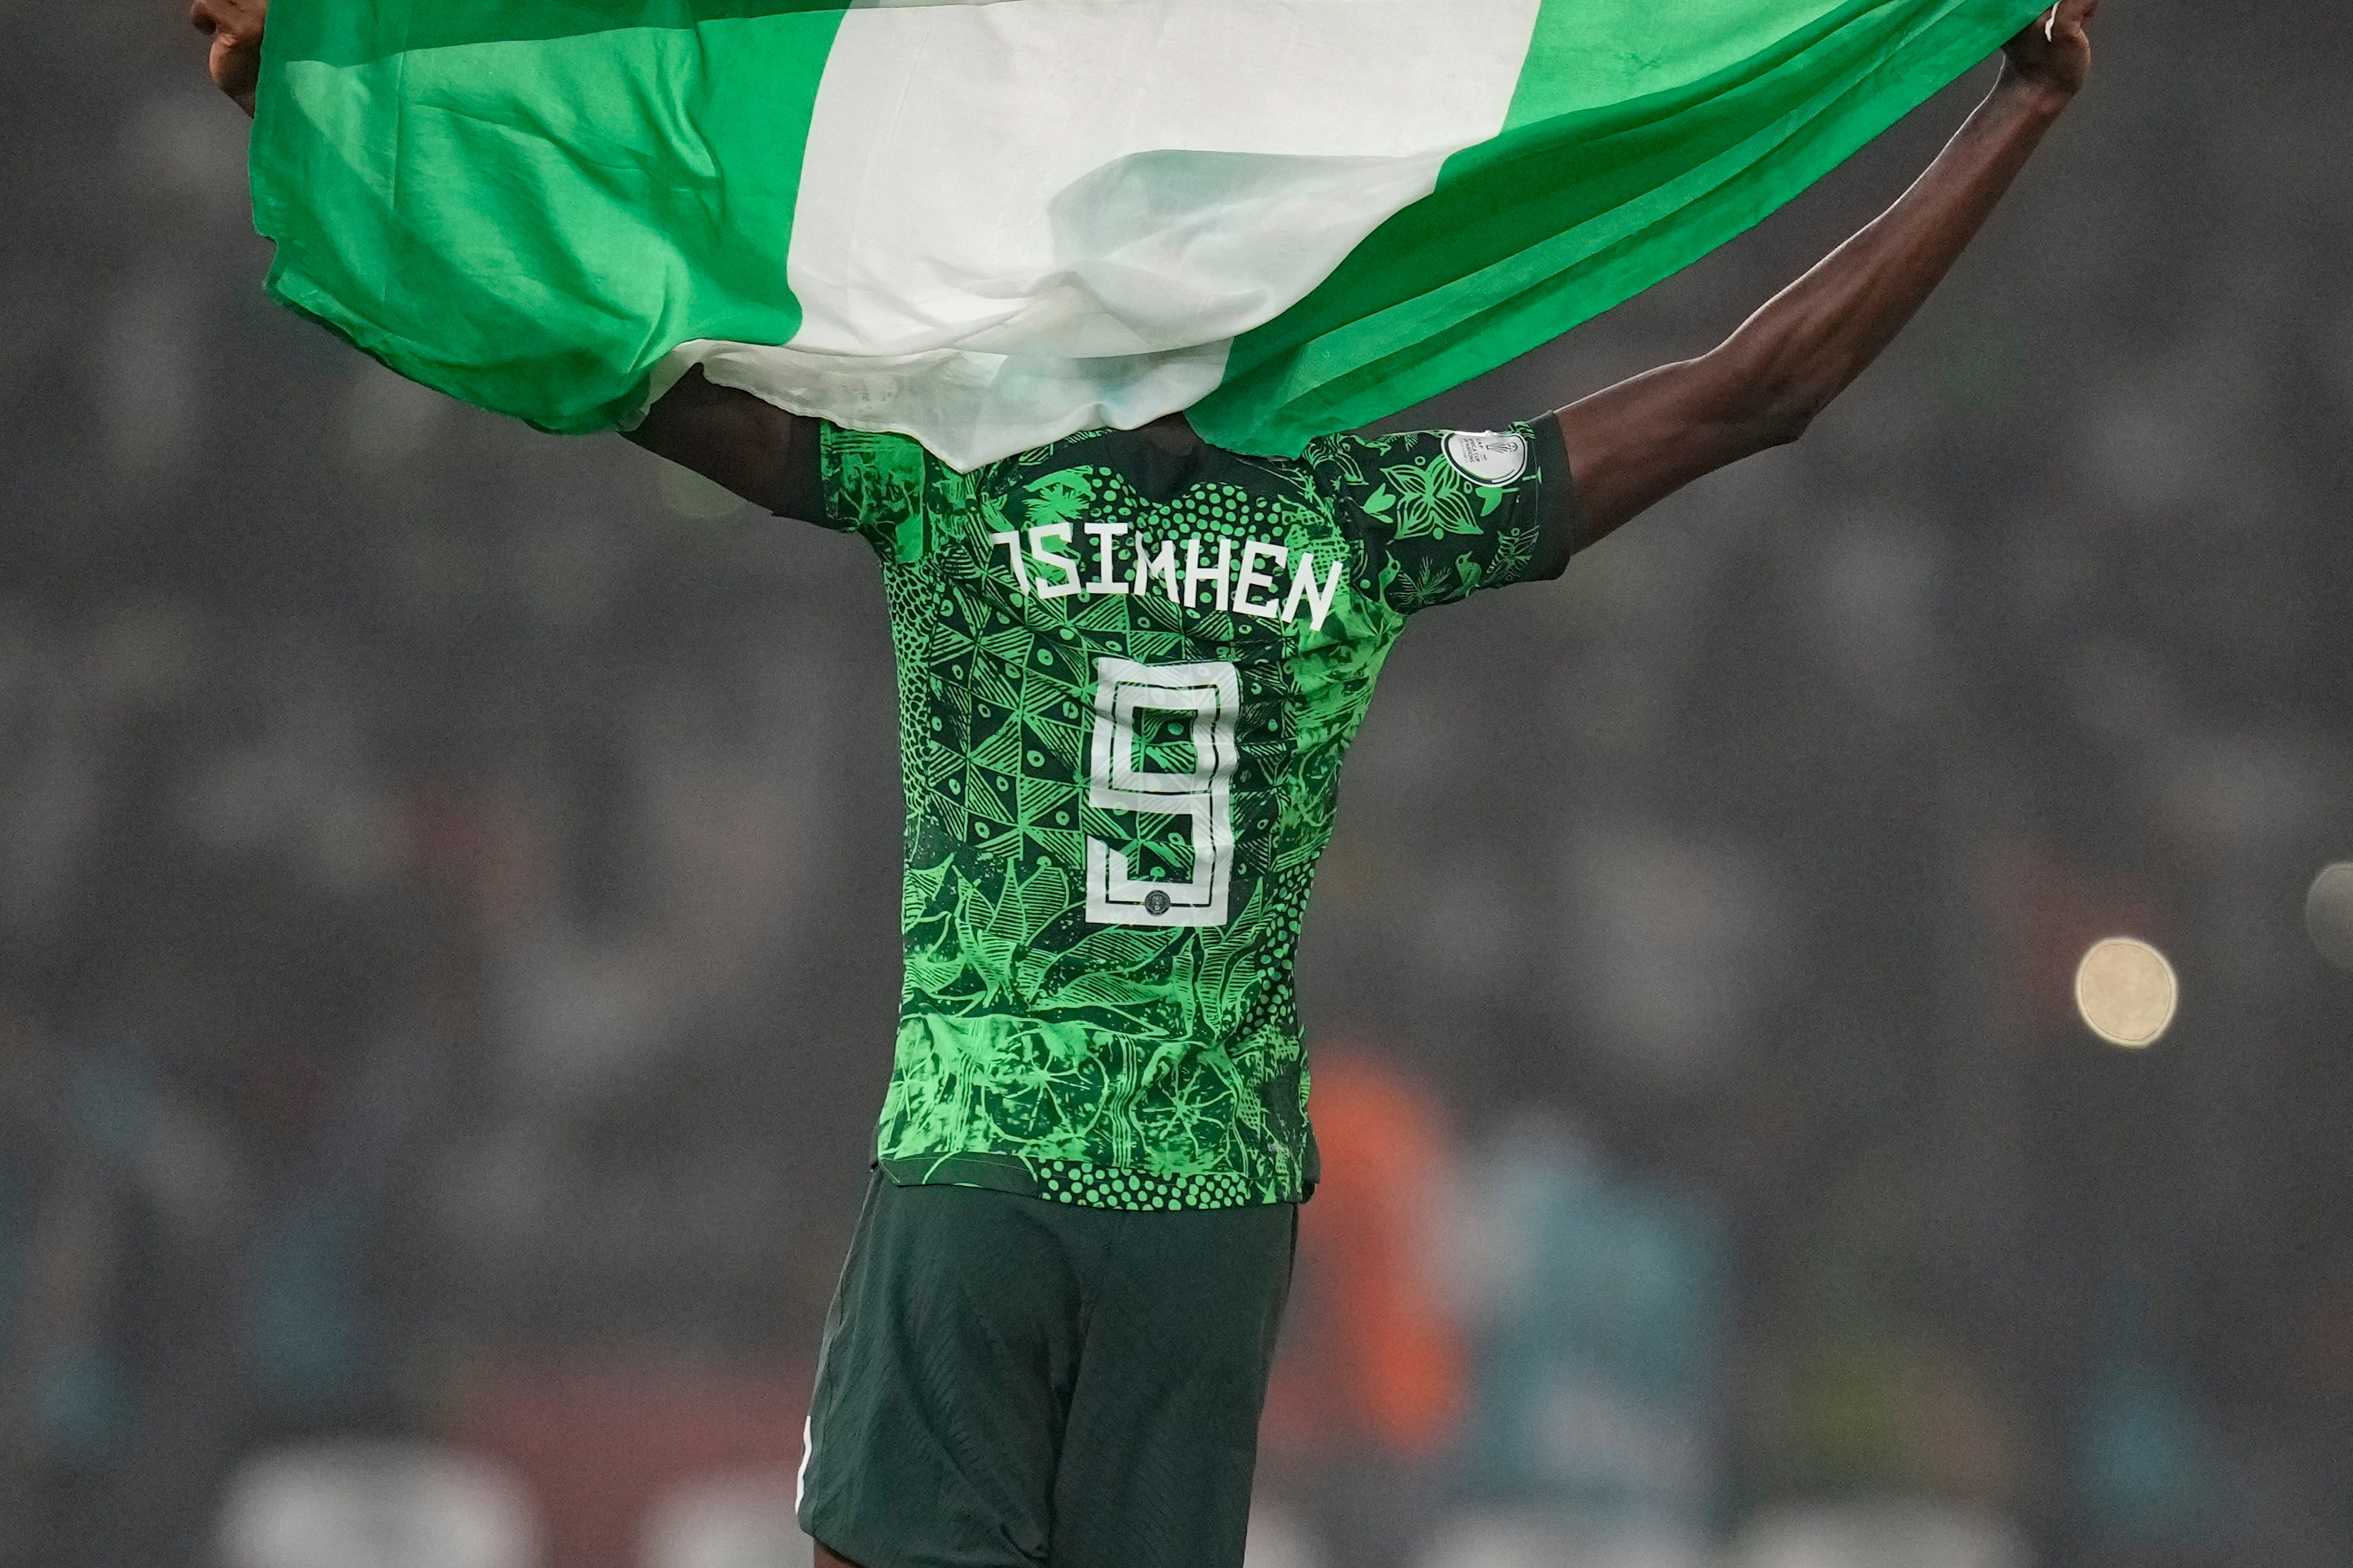 Victor Osimhen celebrates after Nigeria defeated South Africa in the African Cup of Nations semi-final